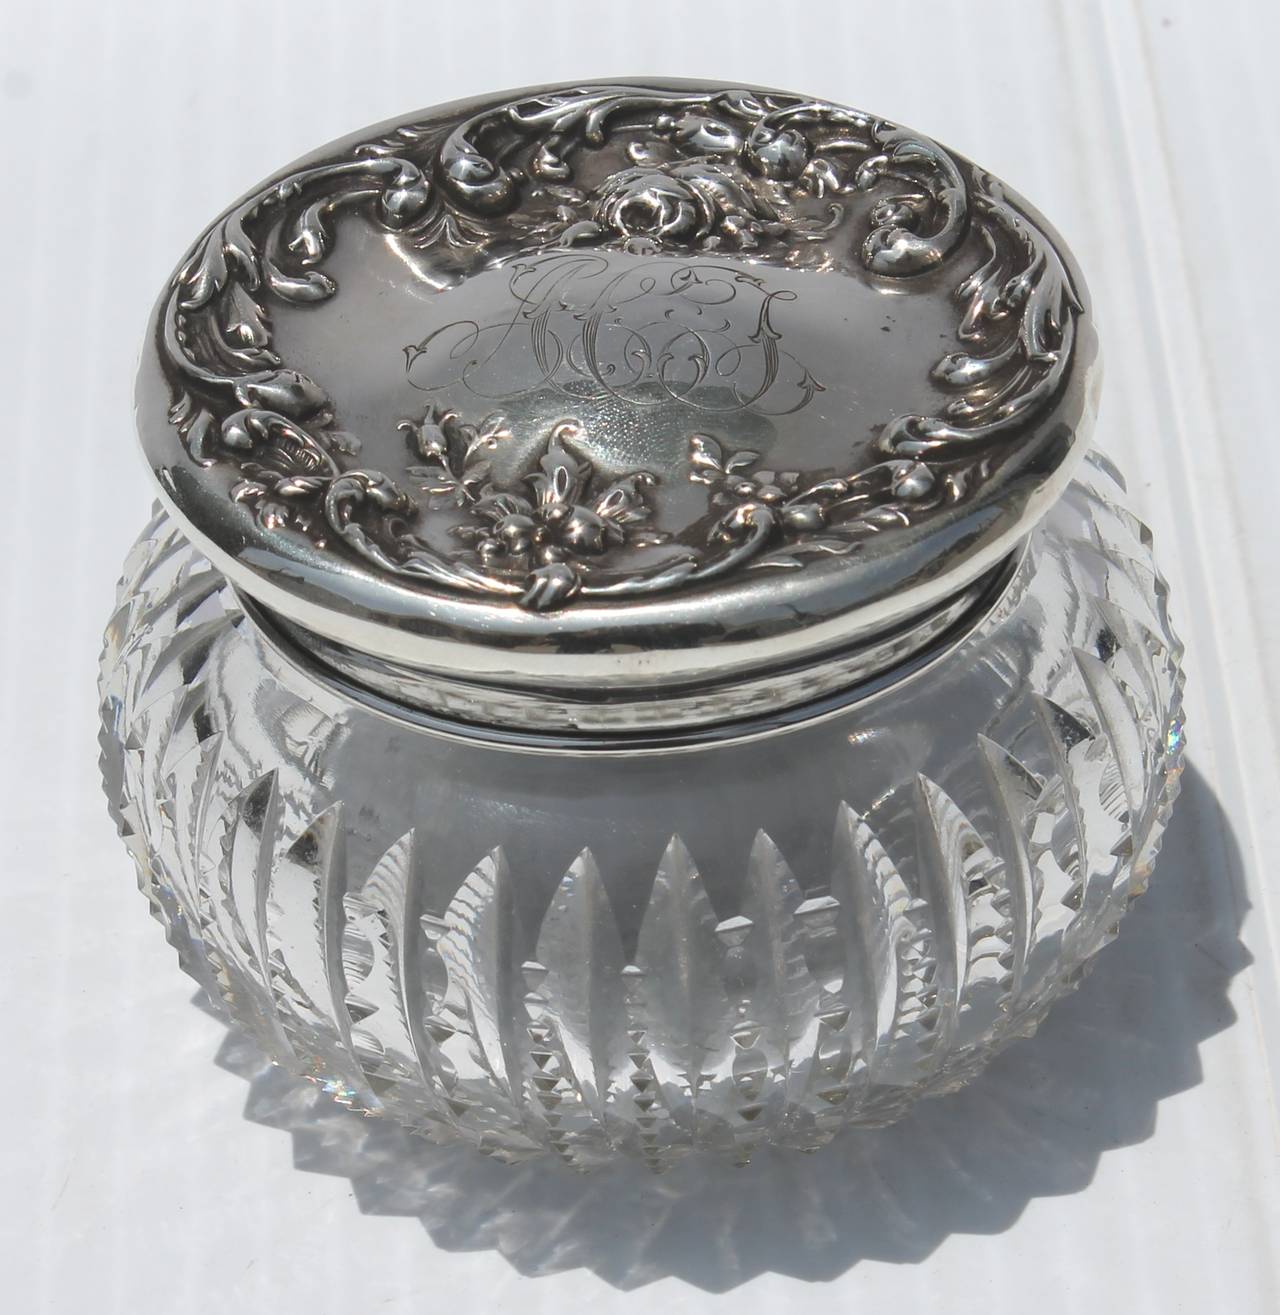 American Collection of Six Assorted Cut-Glass and Sterling Jars